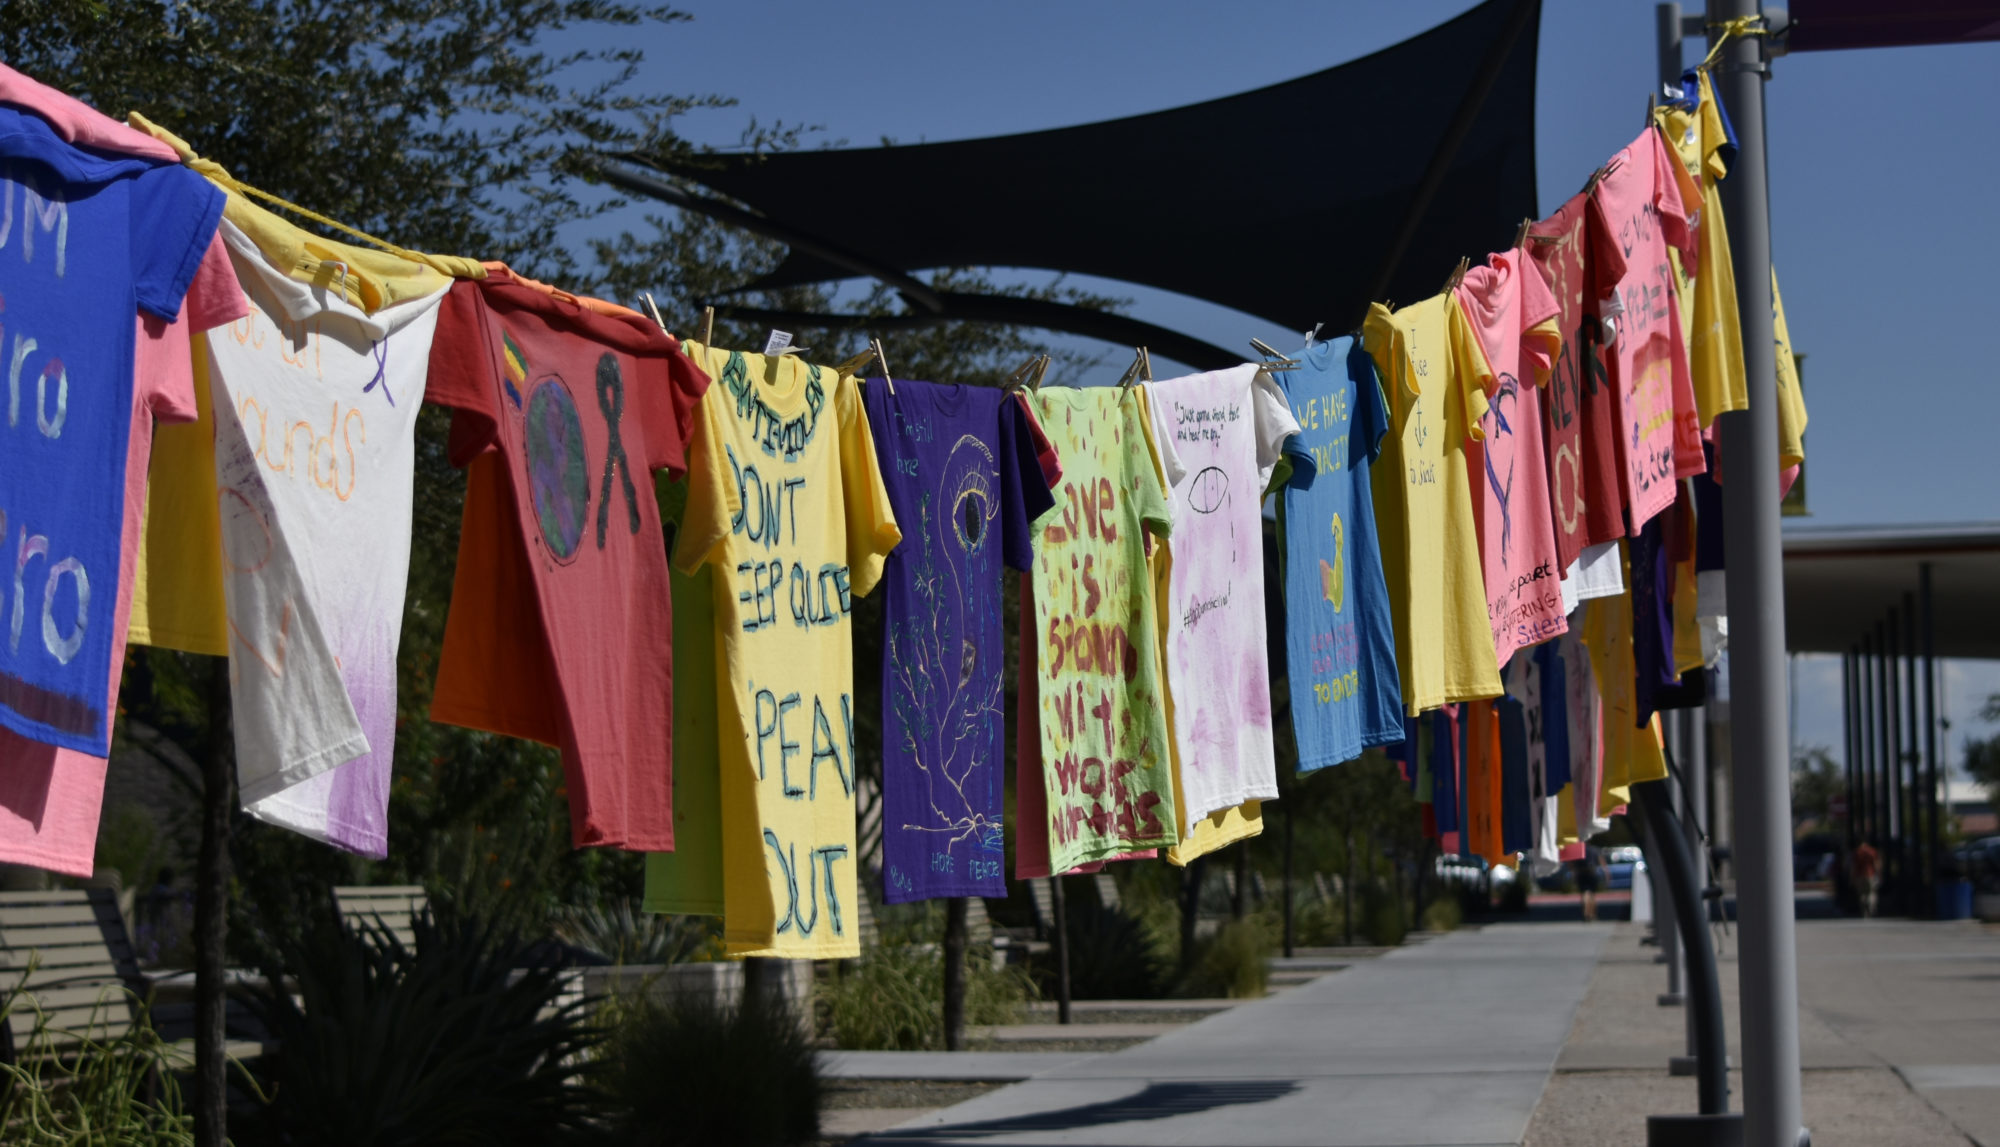 The Clothesline Project at MCC aims to educate on domestic violence